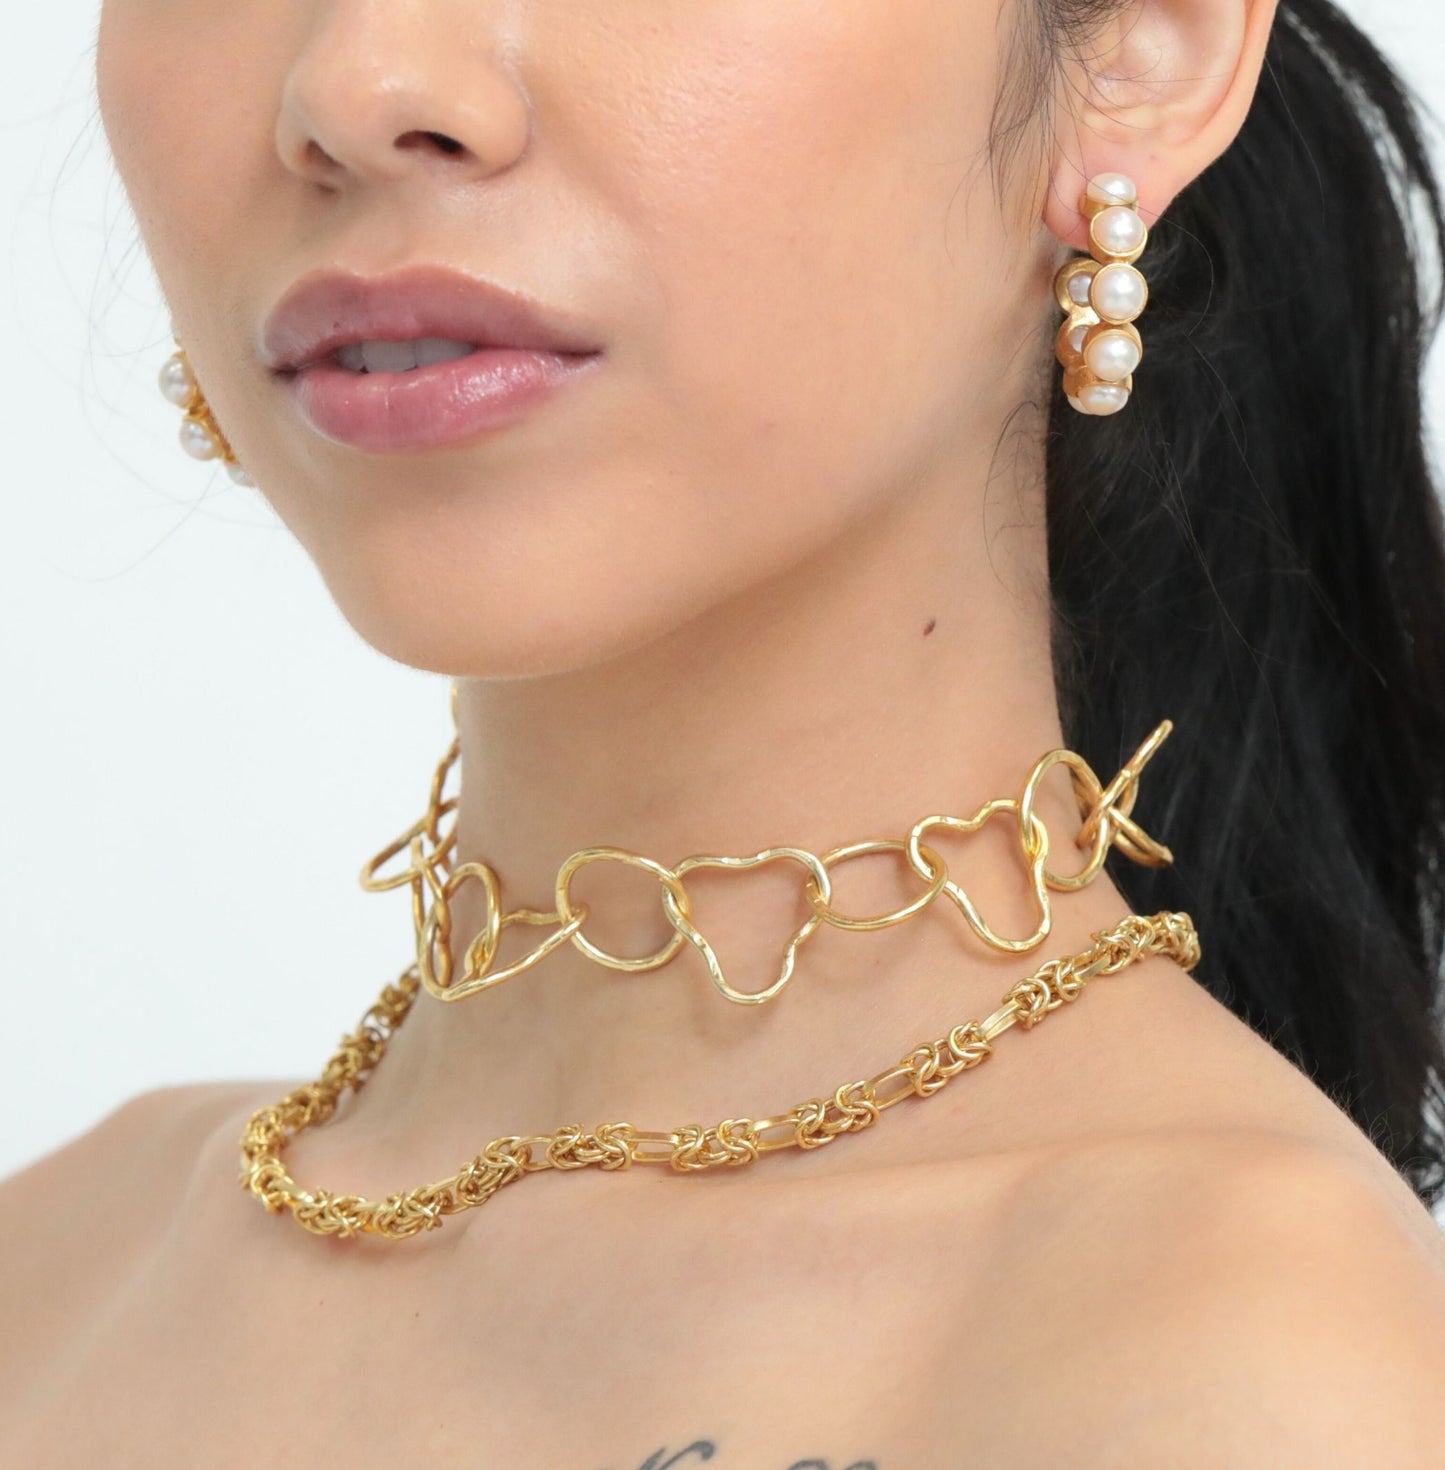 DOUBLE-LINK GOLD CHAIN